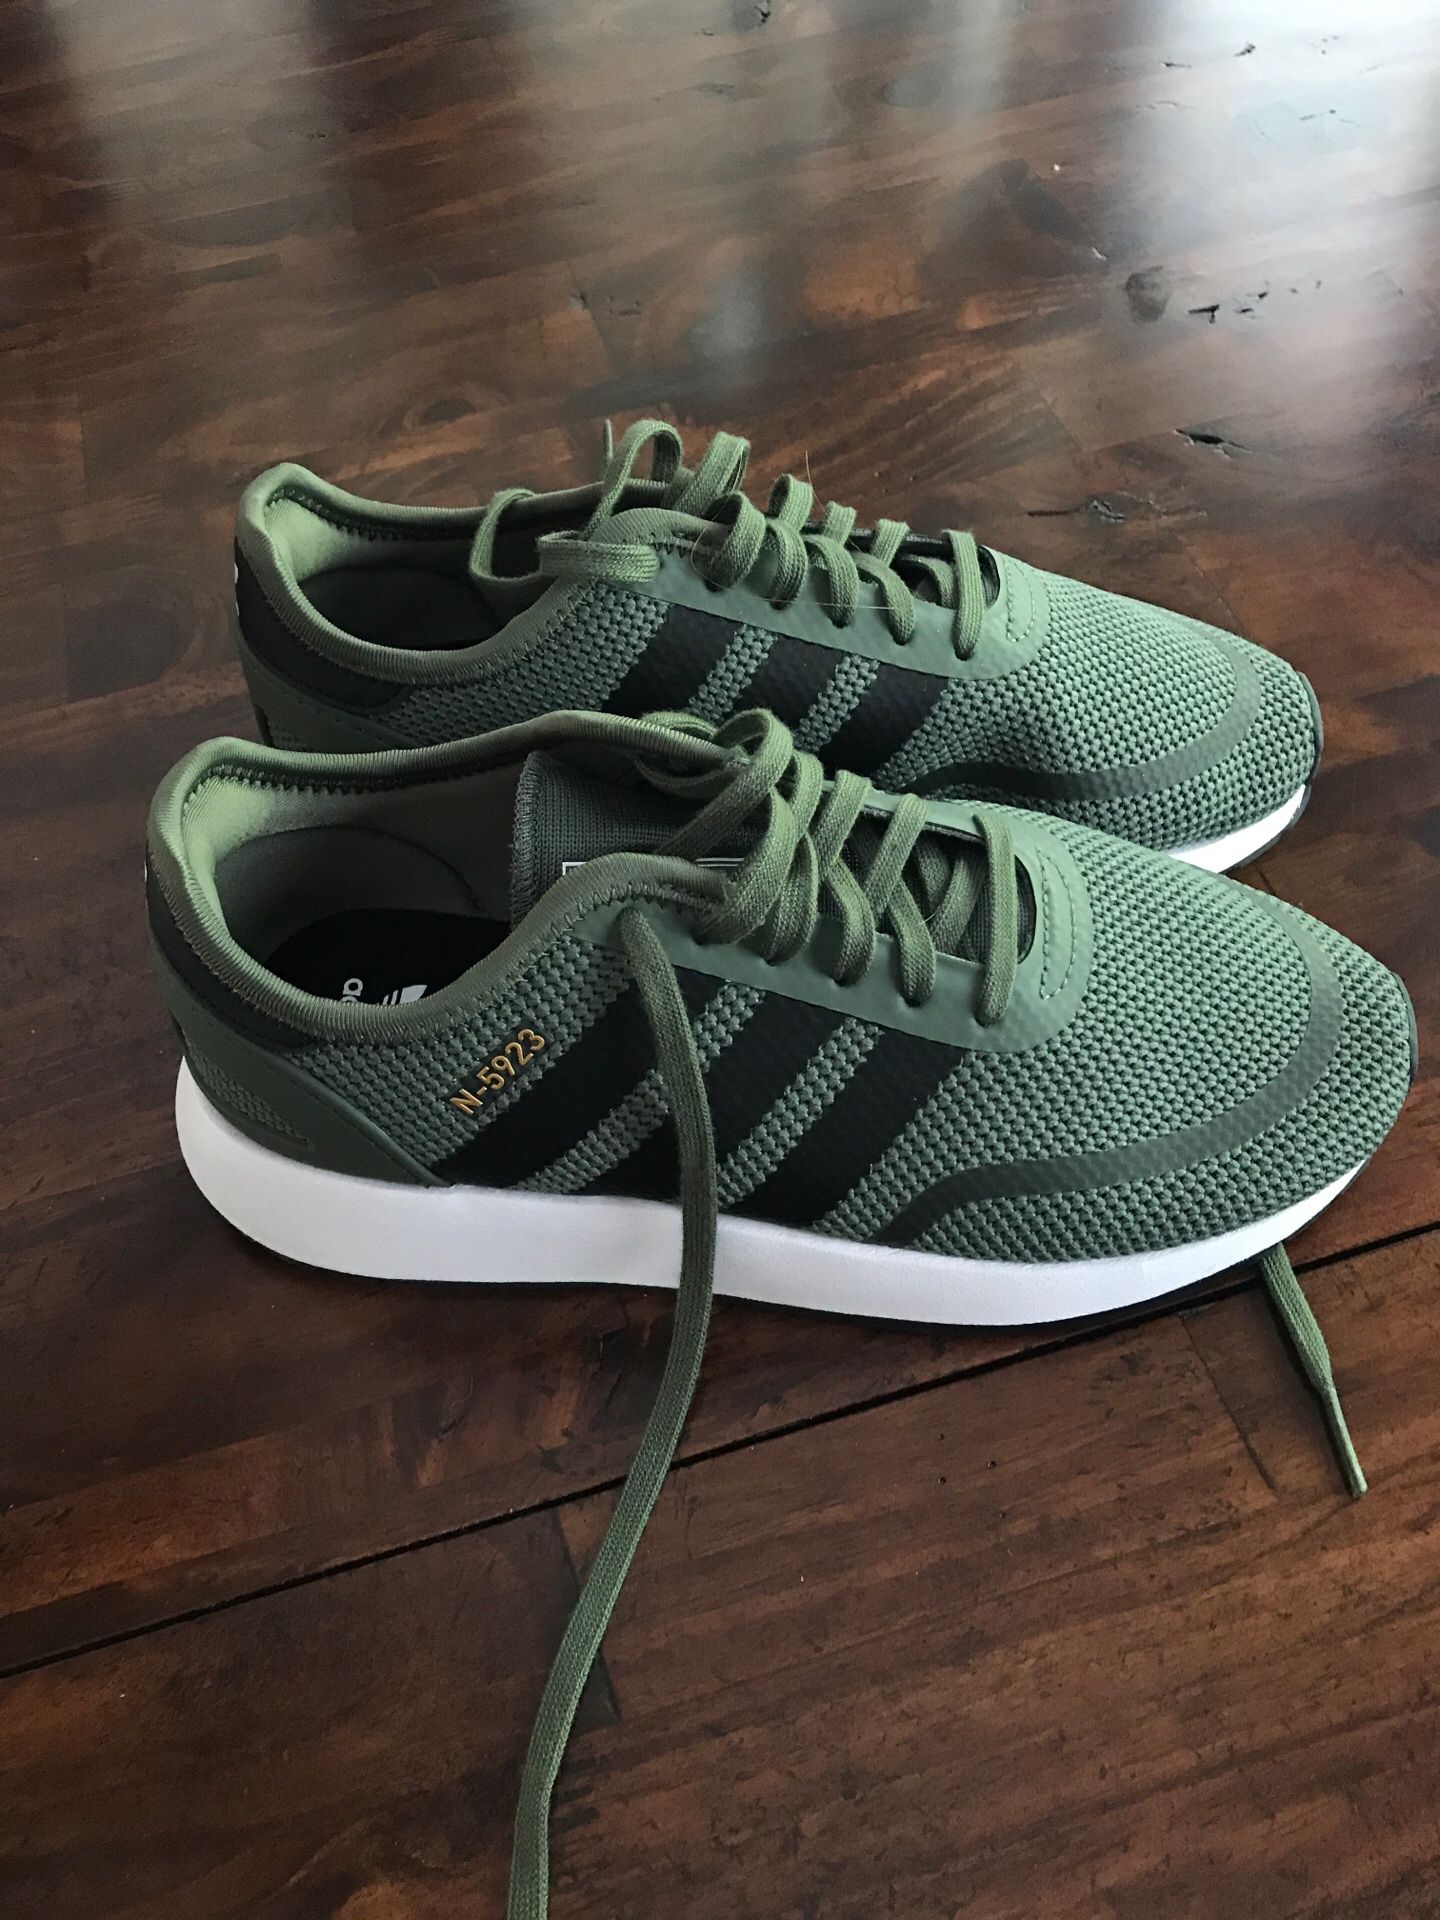 Adidas women’s shoes. Brand new